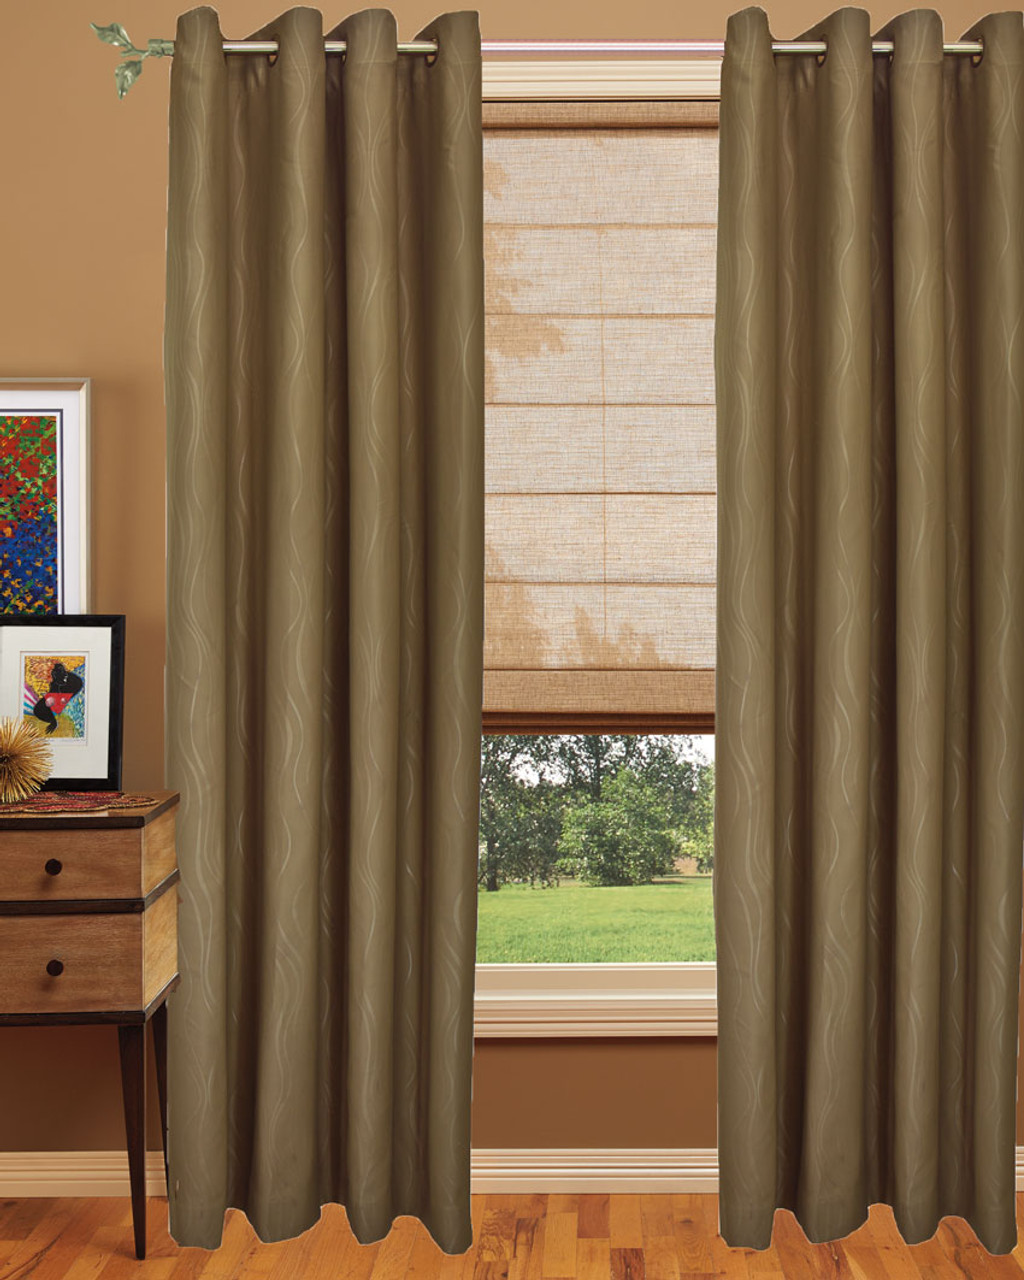 Blackout Curtain with Lining Mocha color Front